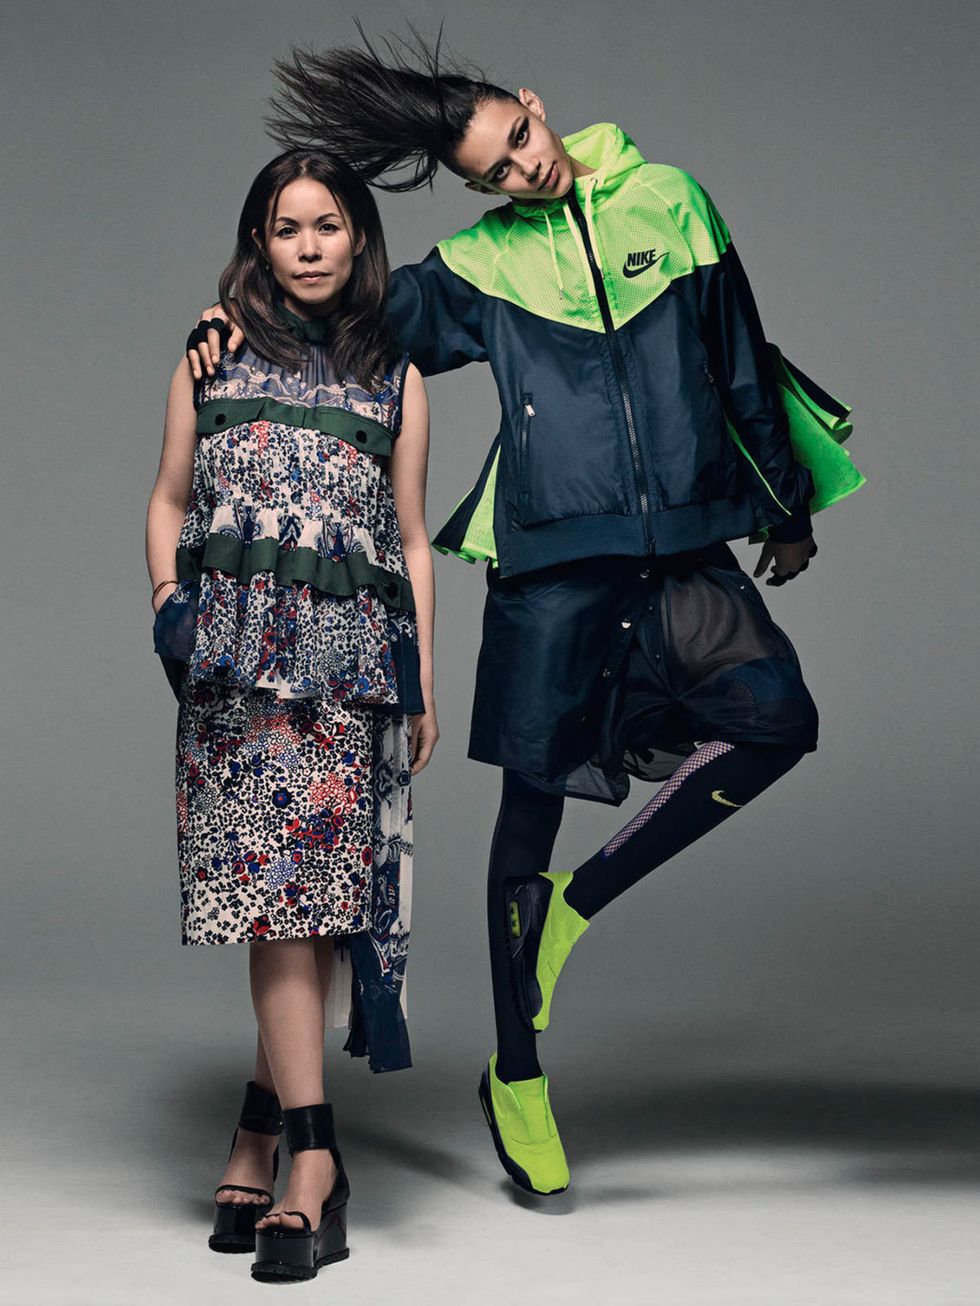 Chitose Abe of Sacai has partnered with NikeLab and put her brilliantly unexpected spin on some of the sports label's most classic pieces.
Available from nike.com from 19 March